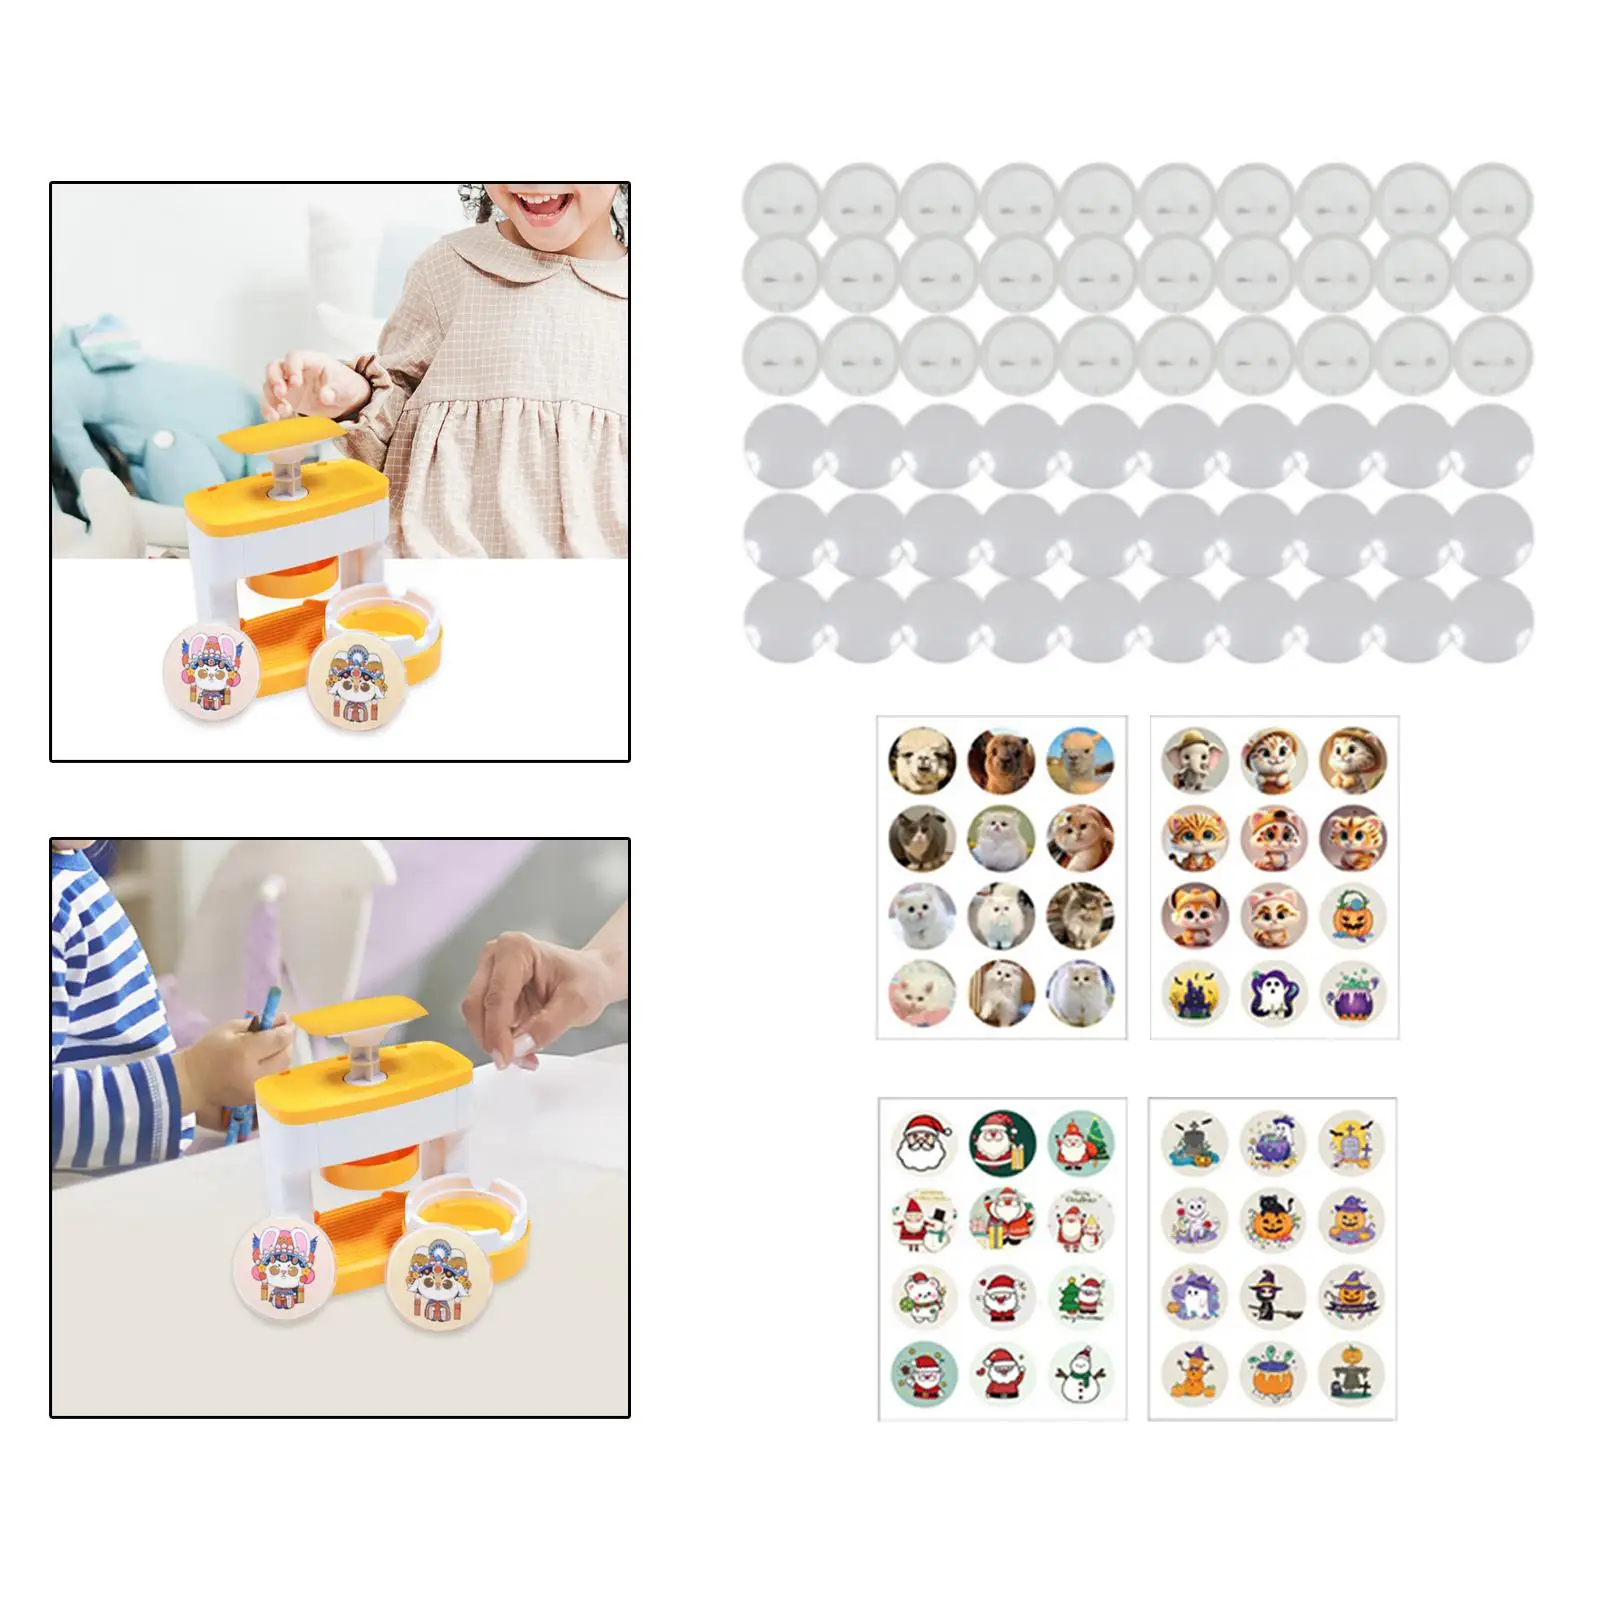 Button Badge Starter Sets Portable Easy Installation Upgrade Multiple Crafts for Children Boys Adults Teenagers Interactive Toys